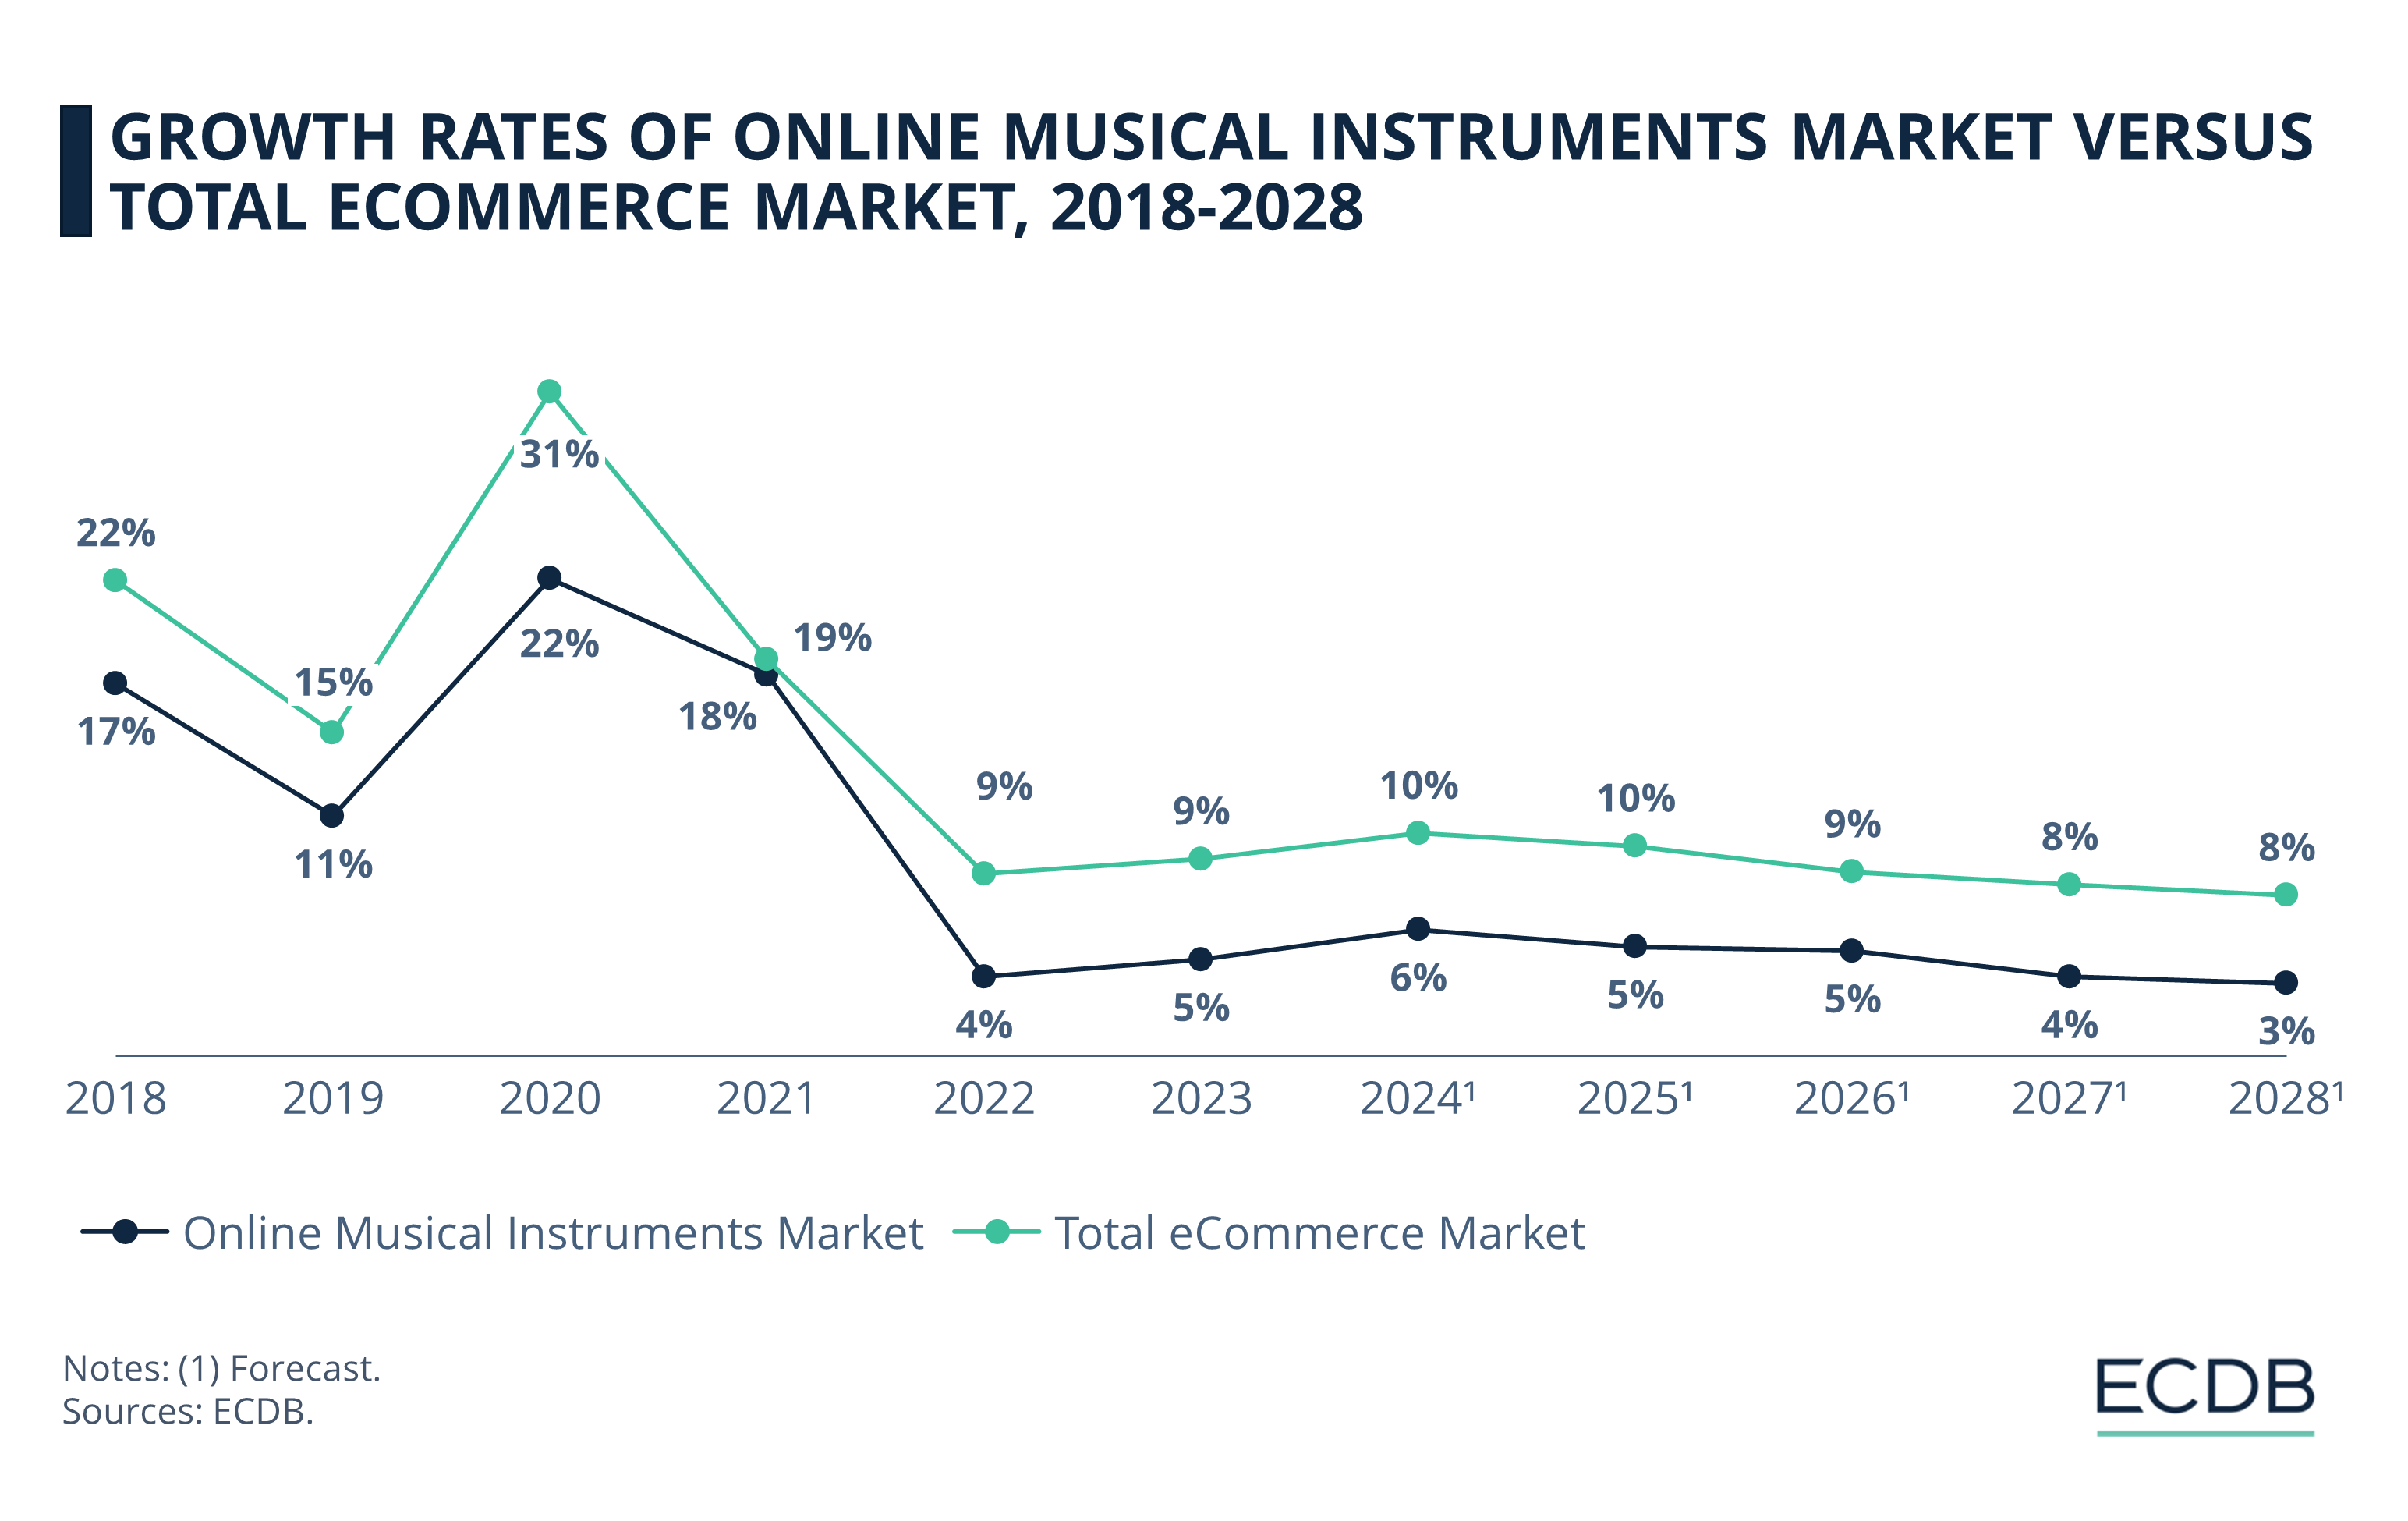 Growth Rates of Online Musical Instruments Market Versus Total eCommerce Market, 2018-2028